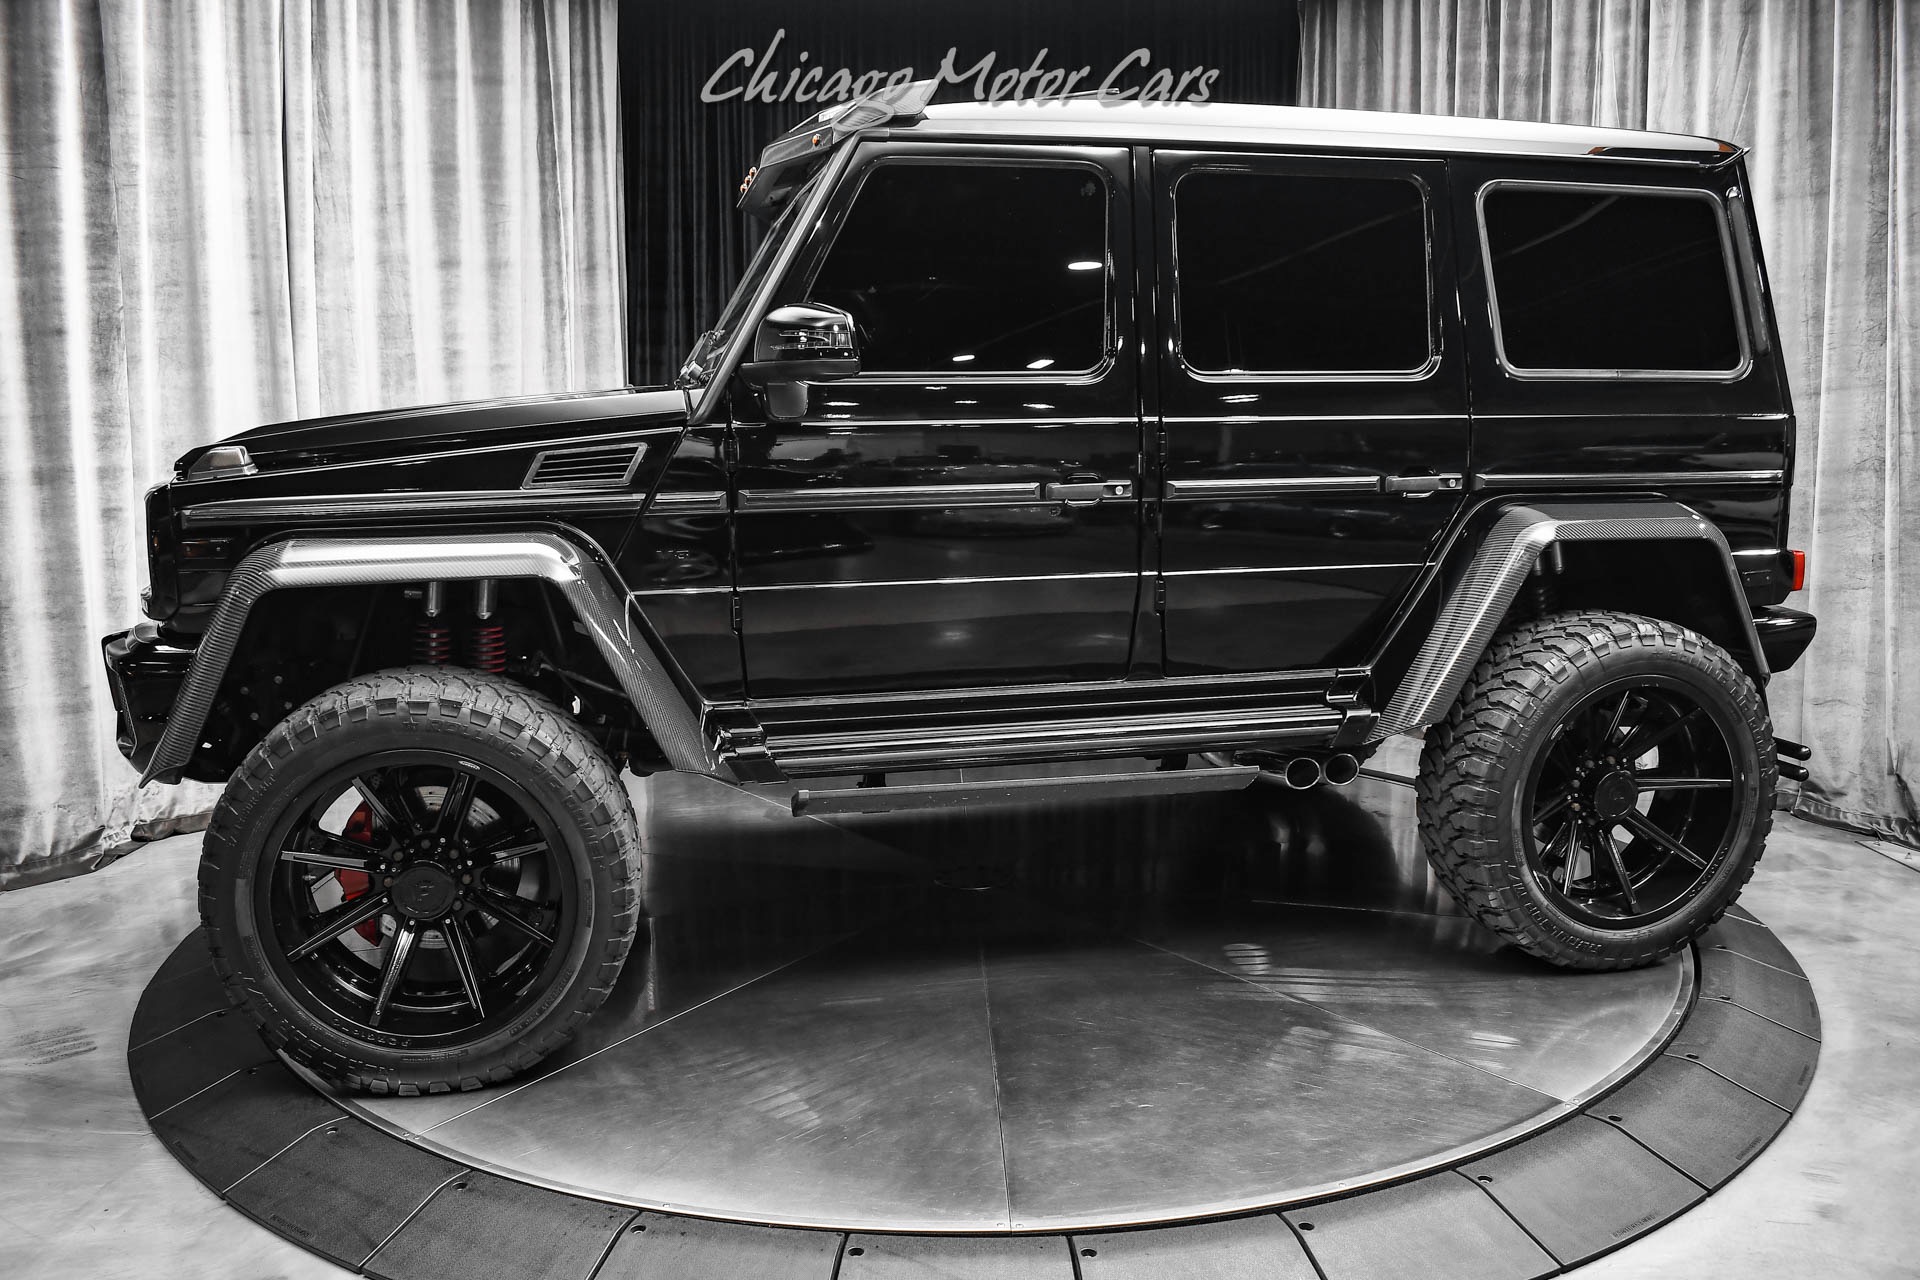 Used-2017-Mercedes-Benz-G550-4x4-Squared-SUV-Black-on-Black-Upgraded-Wheels-1-of-ONLY-300-Made-in-US-RARE